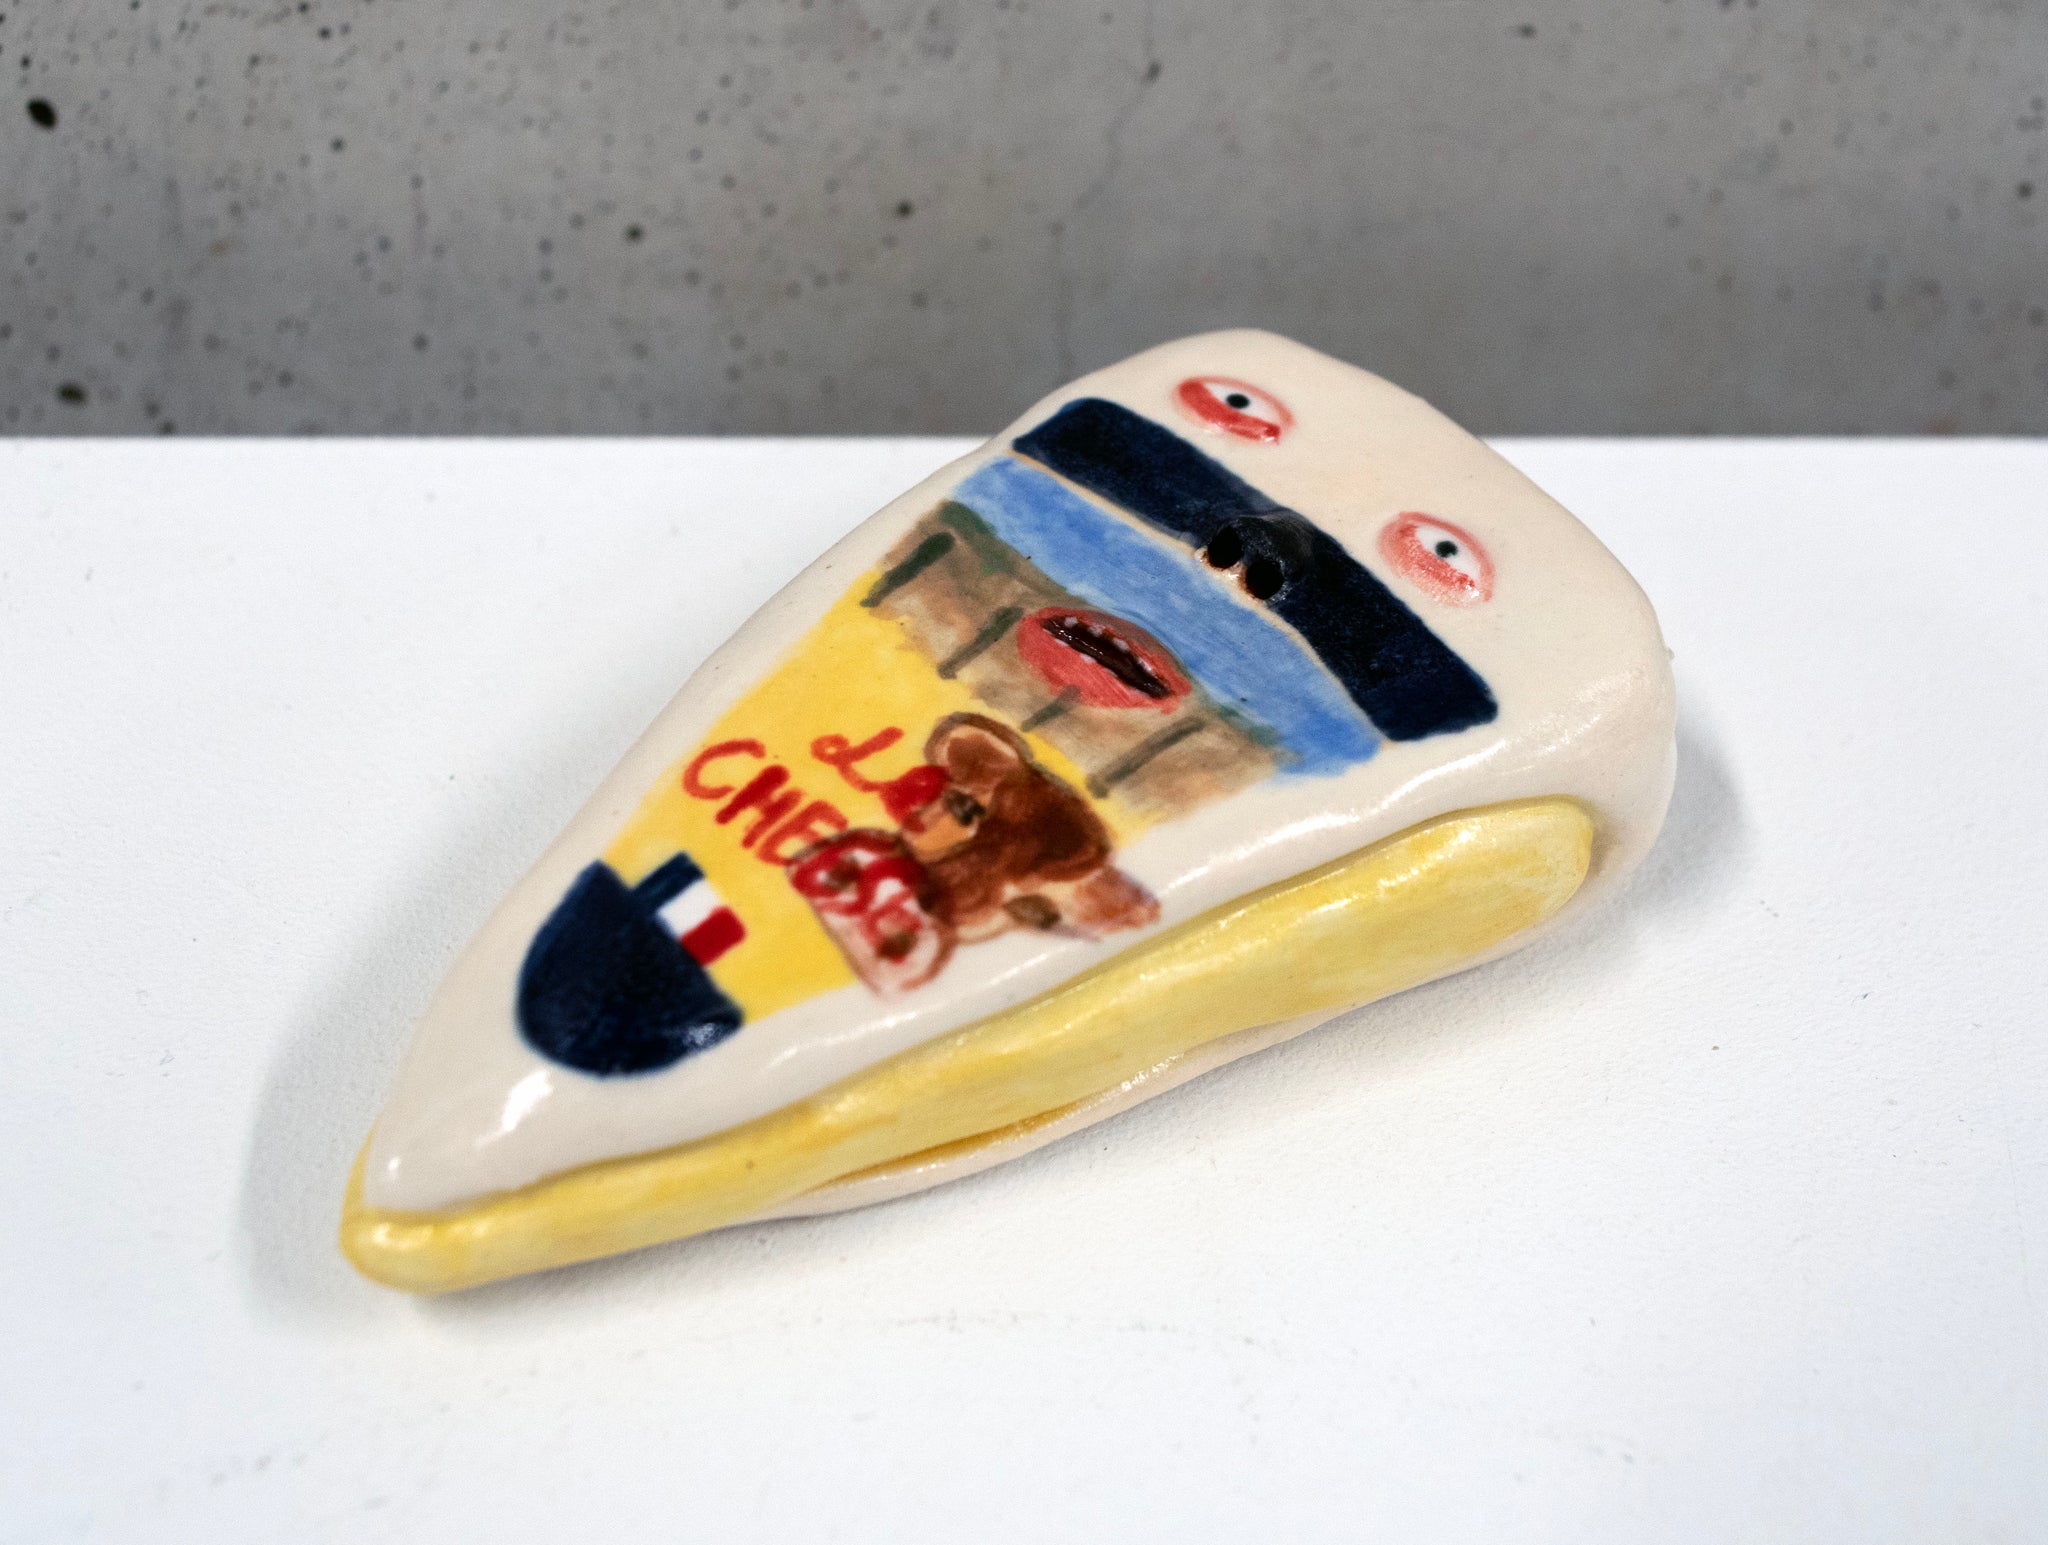 Lauren Cohen, "Brie with French Label" SOLD